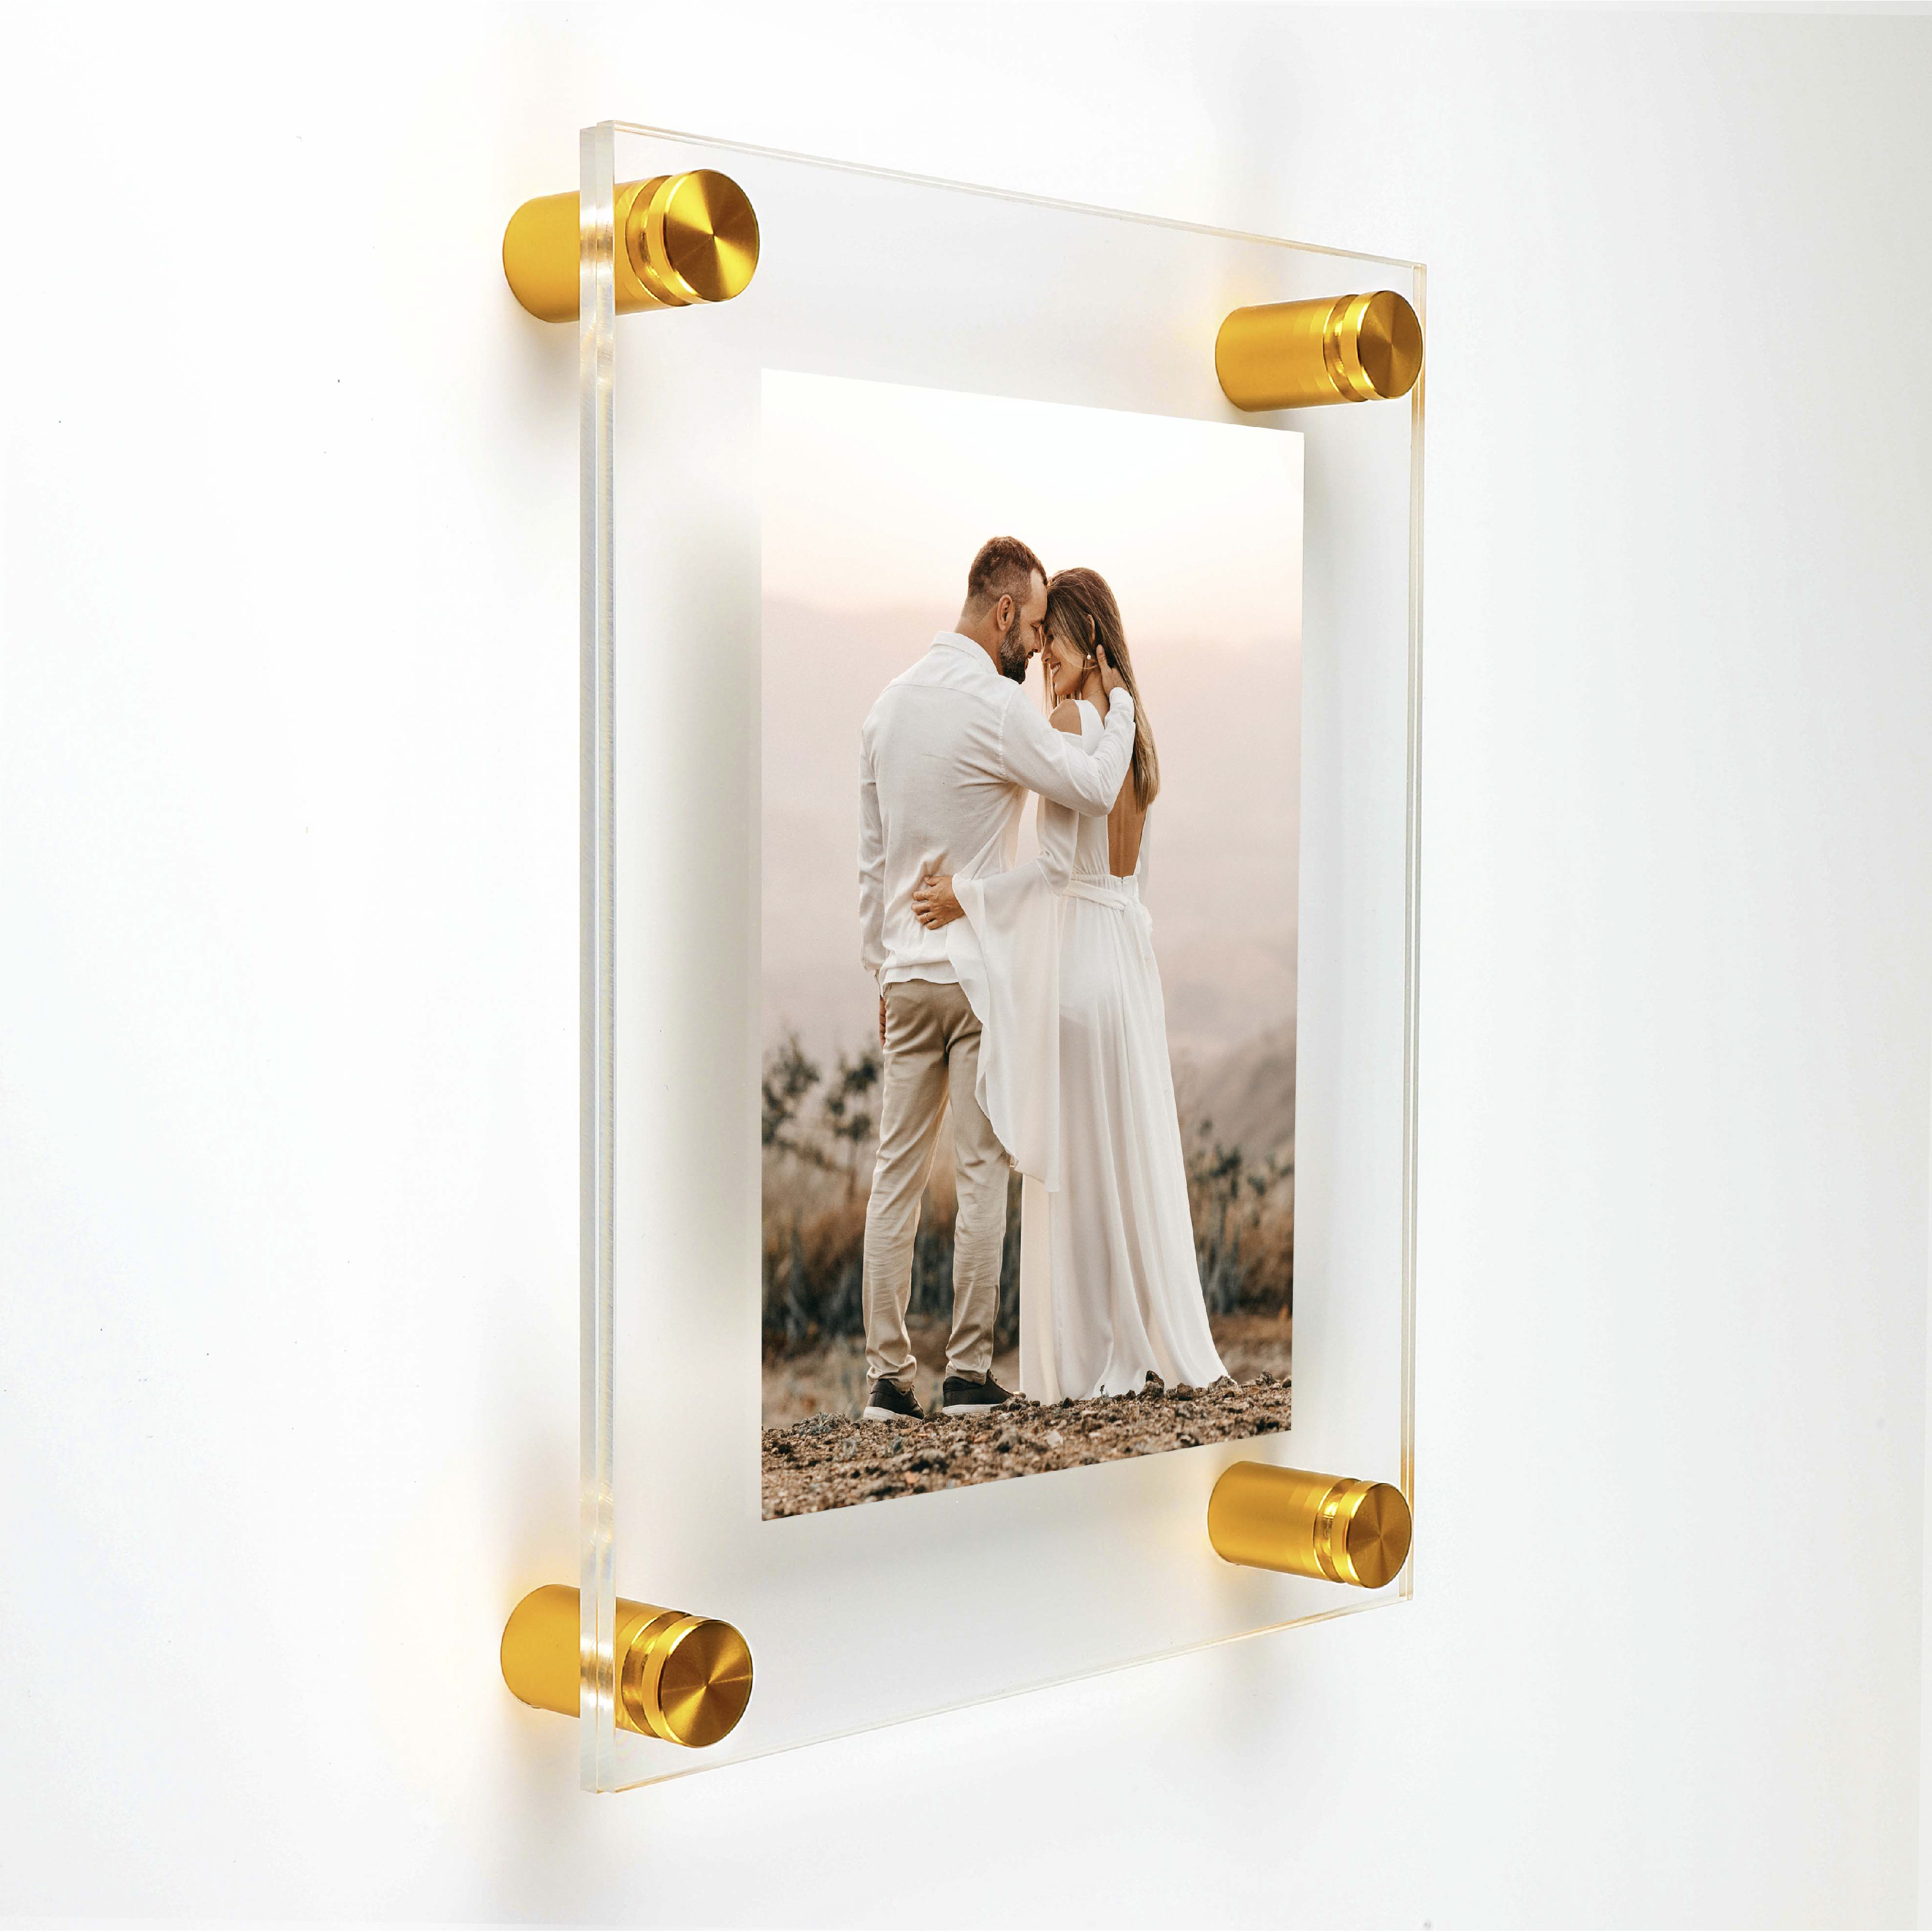 (2) 13-1/2'' x 16-1/2'' Clear Acrylics , Pre-Drilled With Polished Edges (Thick 1/8'' each), Wall Frame with (4) 3/4'' x 1'' Gold Anodized Aluminum Standoffs includes Screws and Anchors